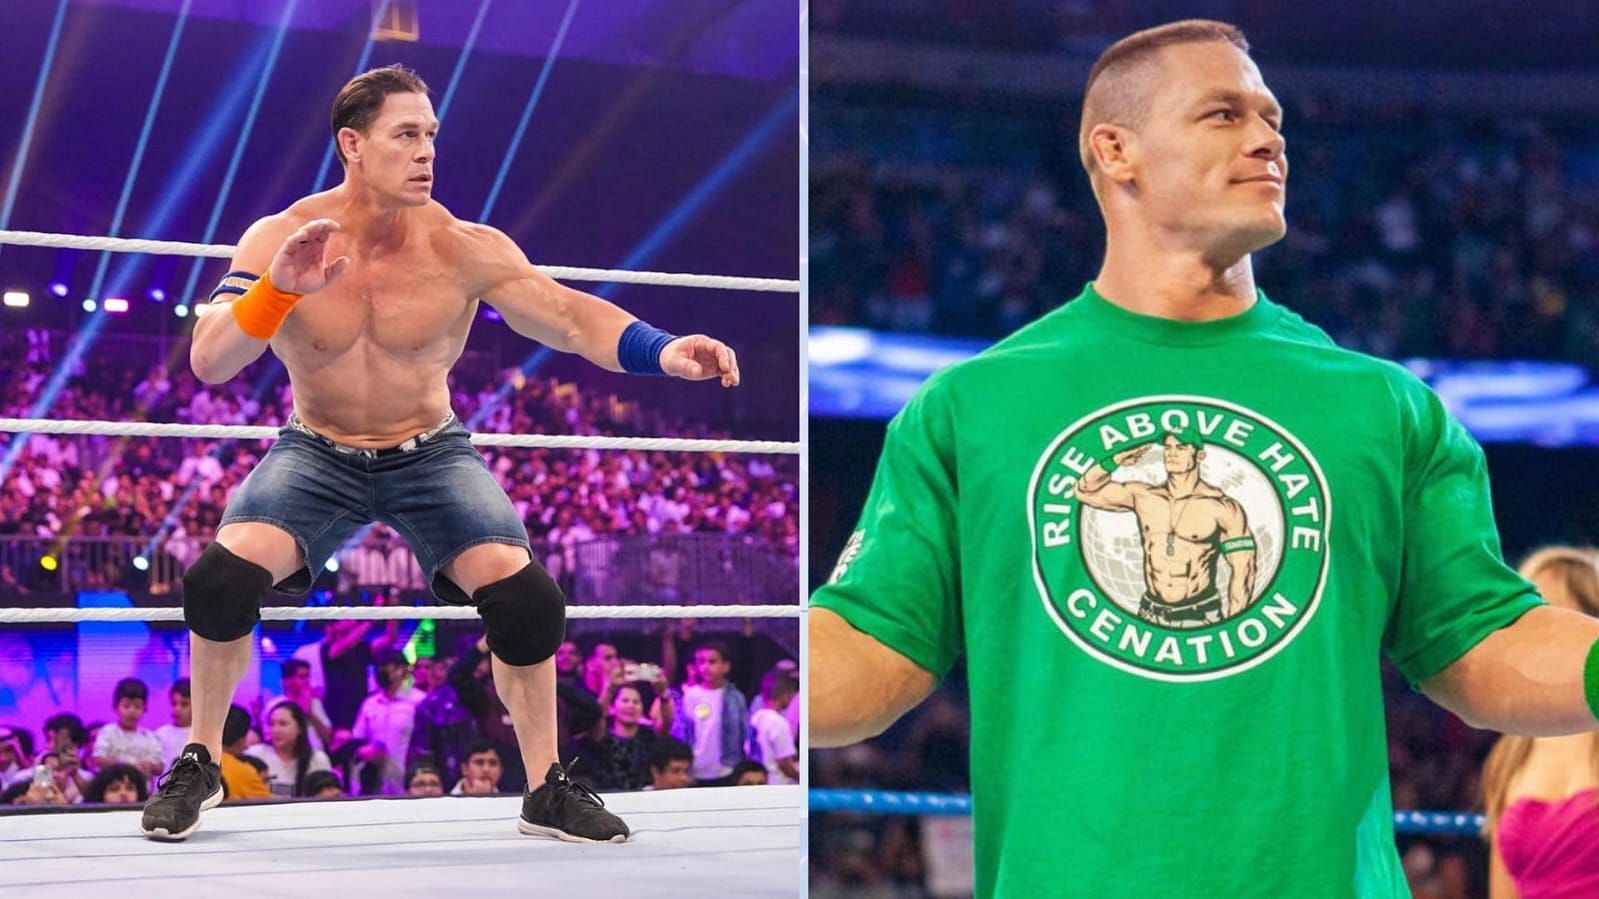 John Cena has been wrestling for more than two decades